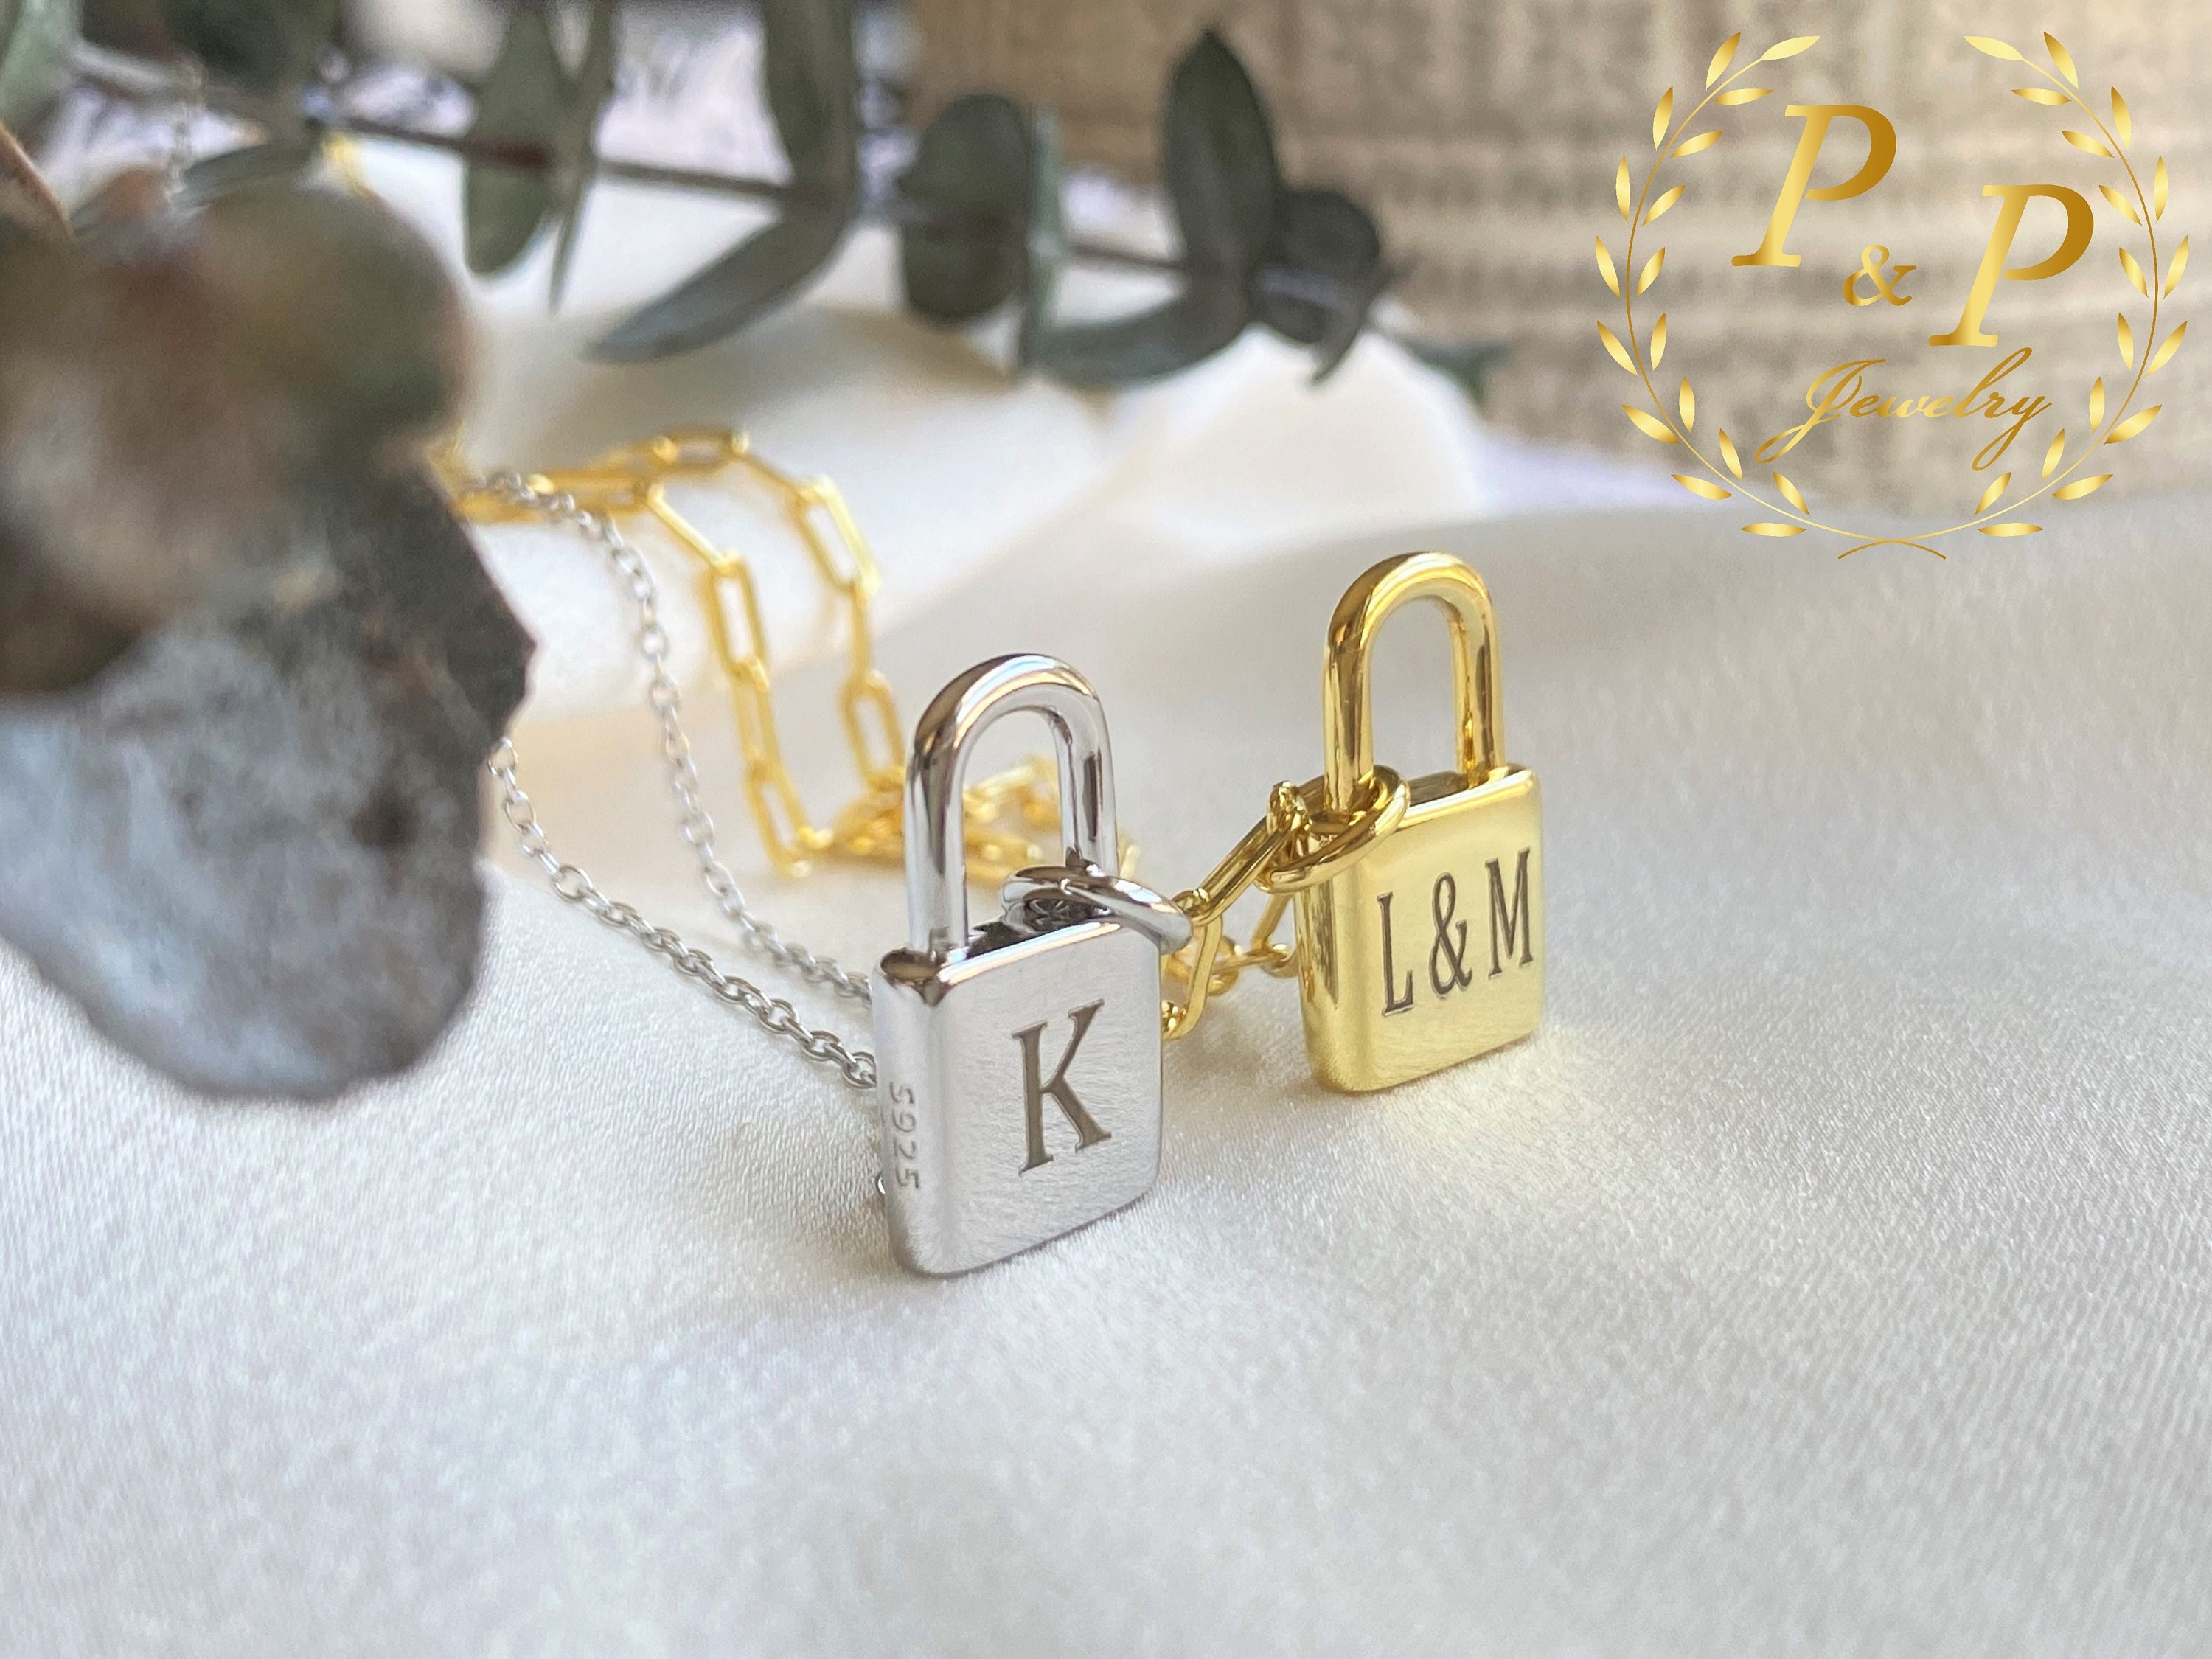 Engraved Initial Bike Lock Charm Necklace